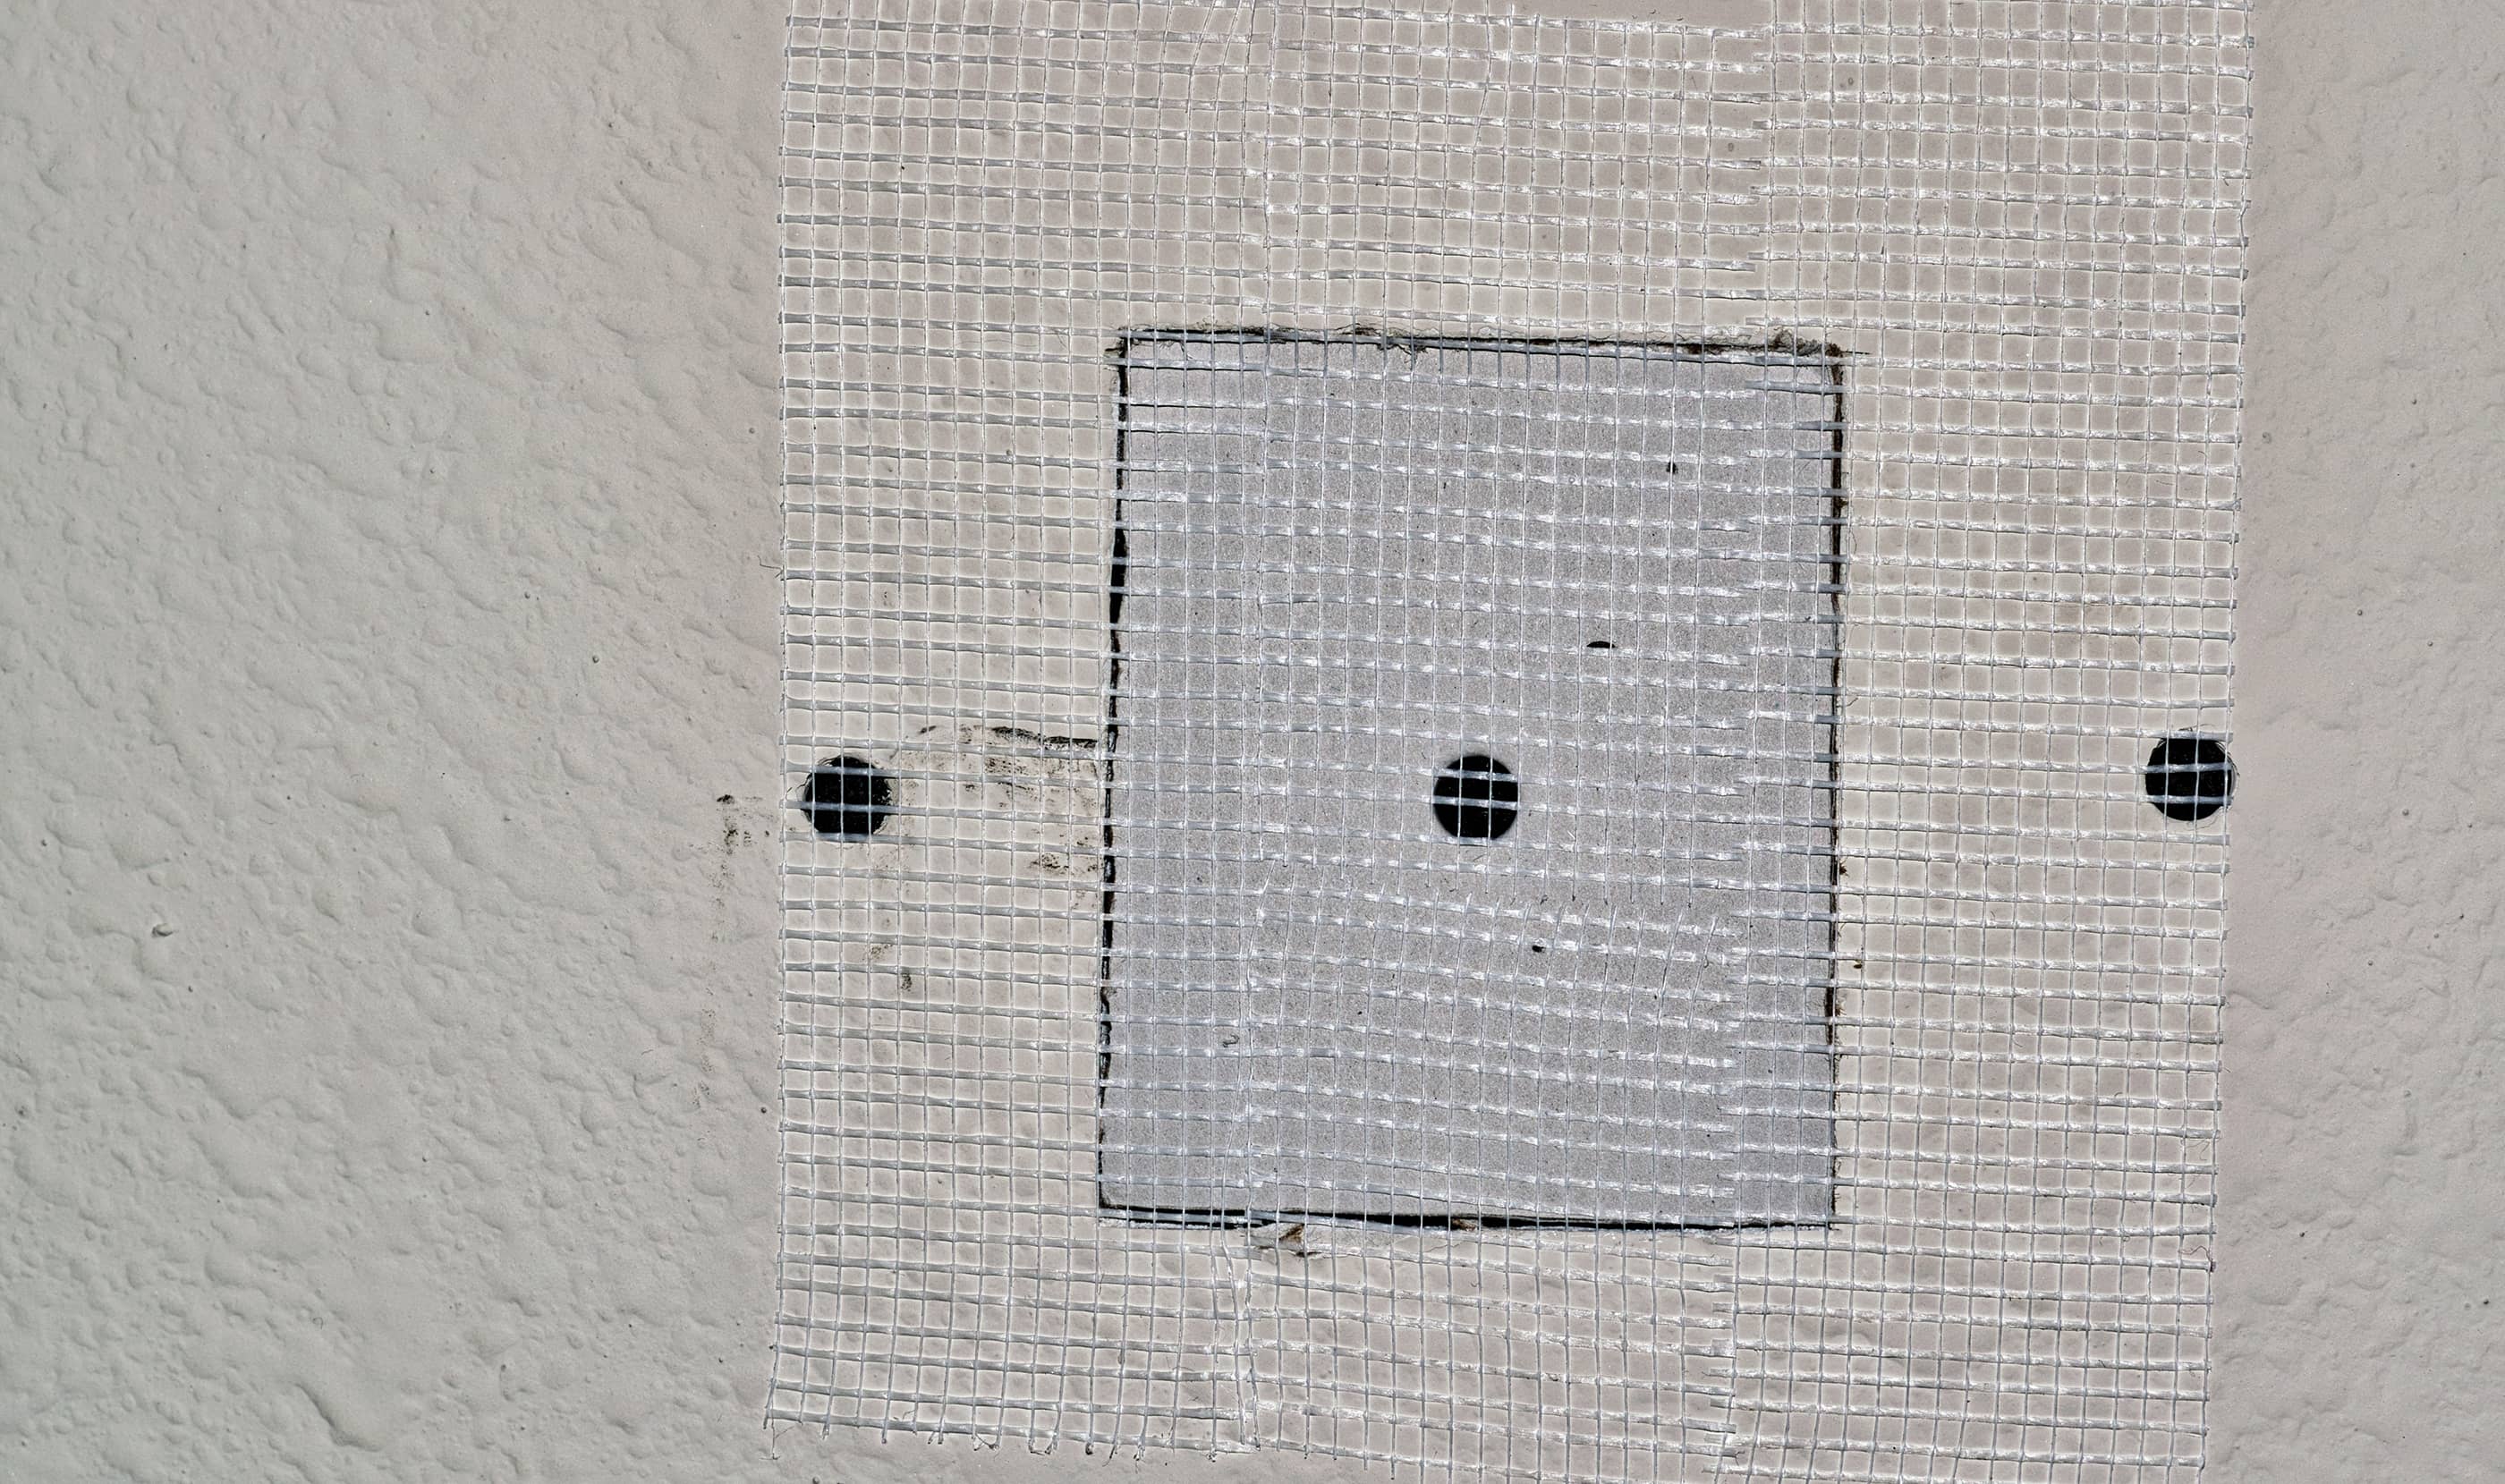 Take the plaster mesh tape and place it along the edge of the new drywall piece to help you create a seamless edge.